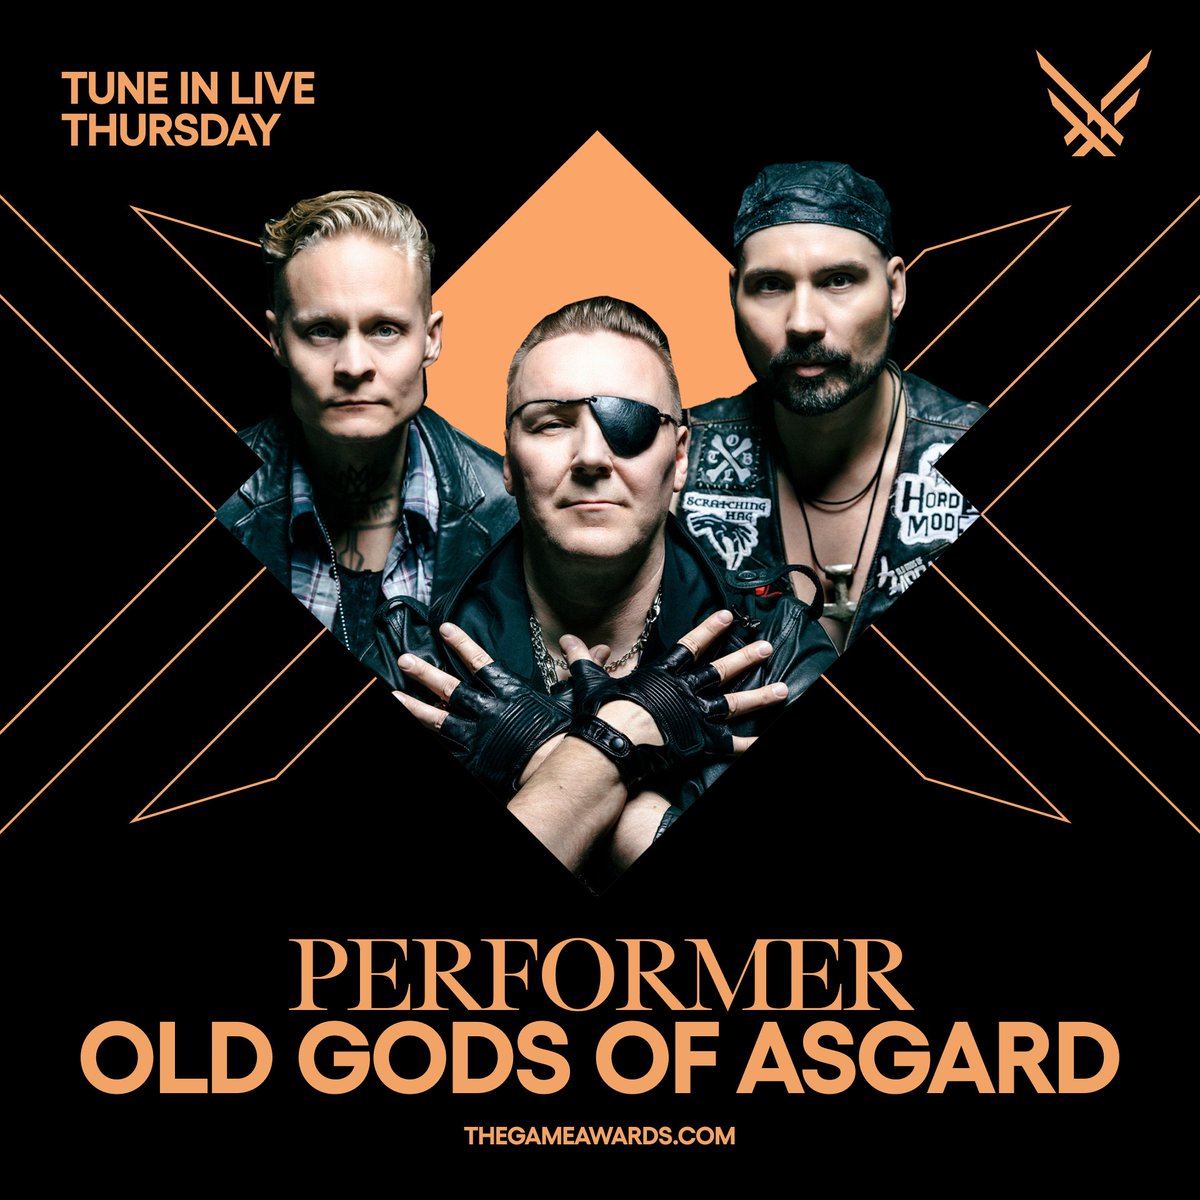 Thursday - do not miss the first-ever live performance from @poetsofthefall as OLD GODS OF ASGARD from @alanwake 2 at #TheGameAwards Streaming live everywhere at thegameawards.com Thursday at 4:30p PT / 7:30p ET / 12:30a GMT